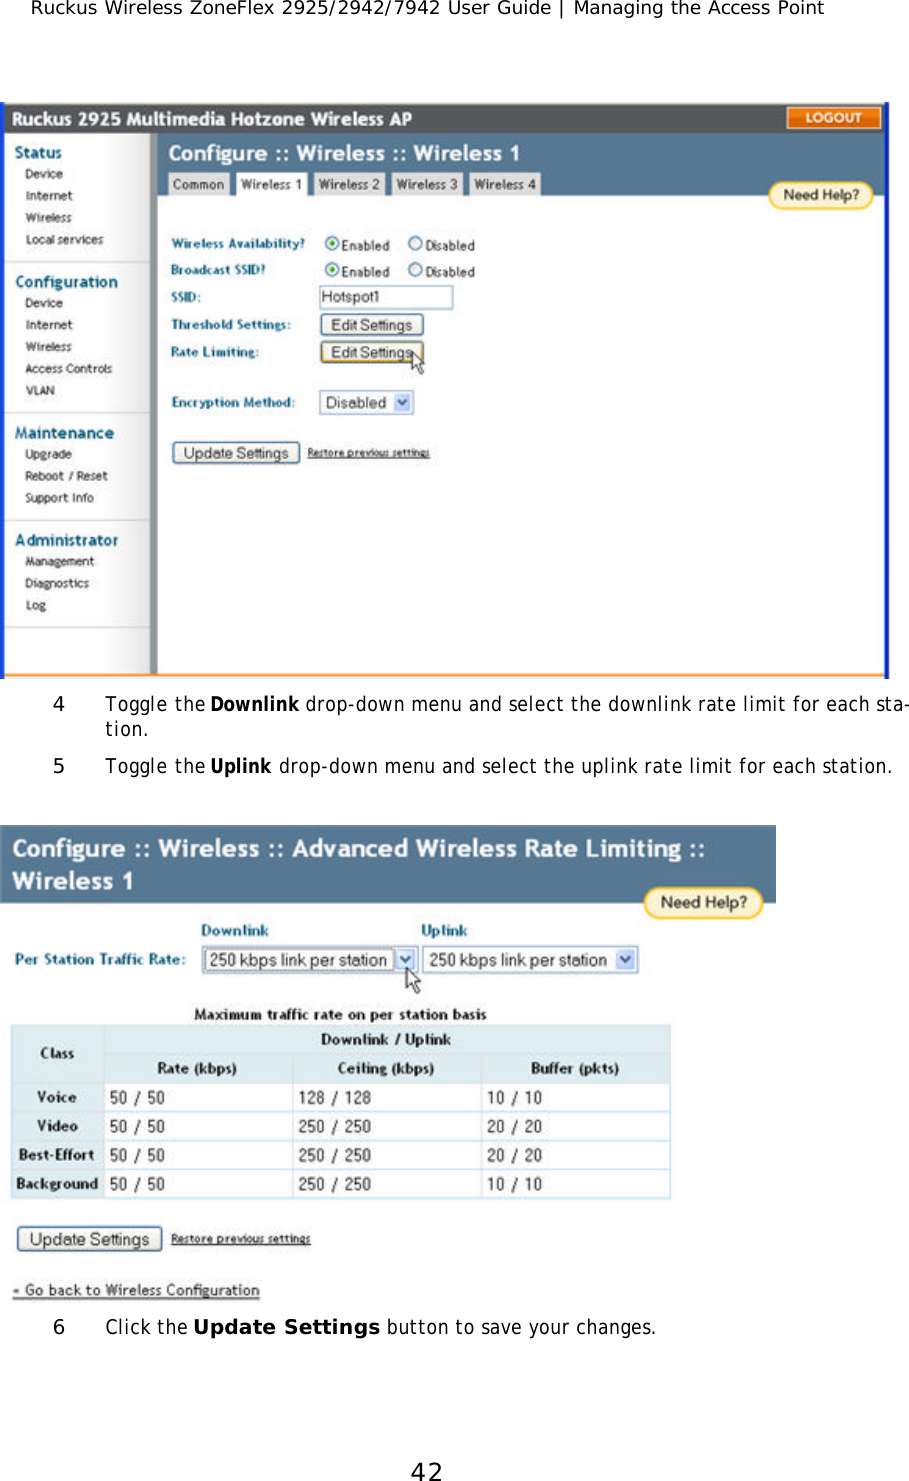 Ruckus Wireless ZoneFlex 2925/2942/7942 User Guide | Managing the Access Point424Toggle the Downlink drop-down menu and select the downlink rate limit for each sta-tion.5Toggle the Uplink drop-down menu and select the uplink rate limit for each station.6Click the Update Settings button to save your changes.